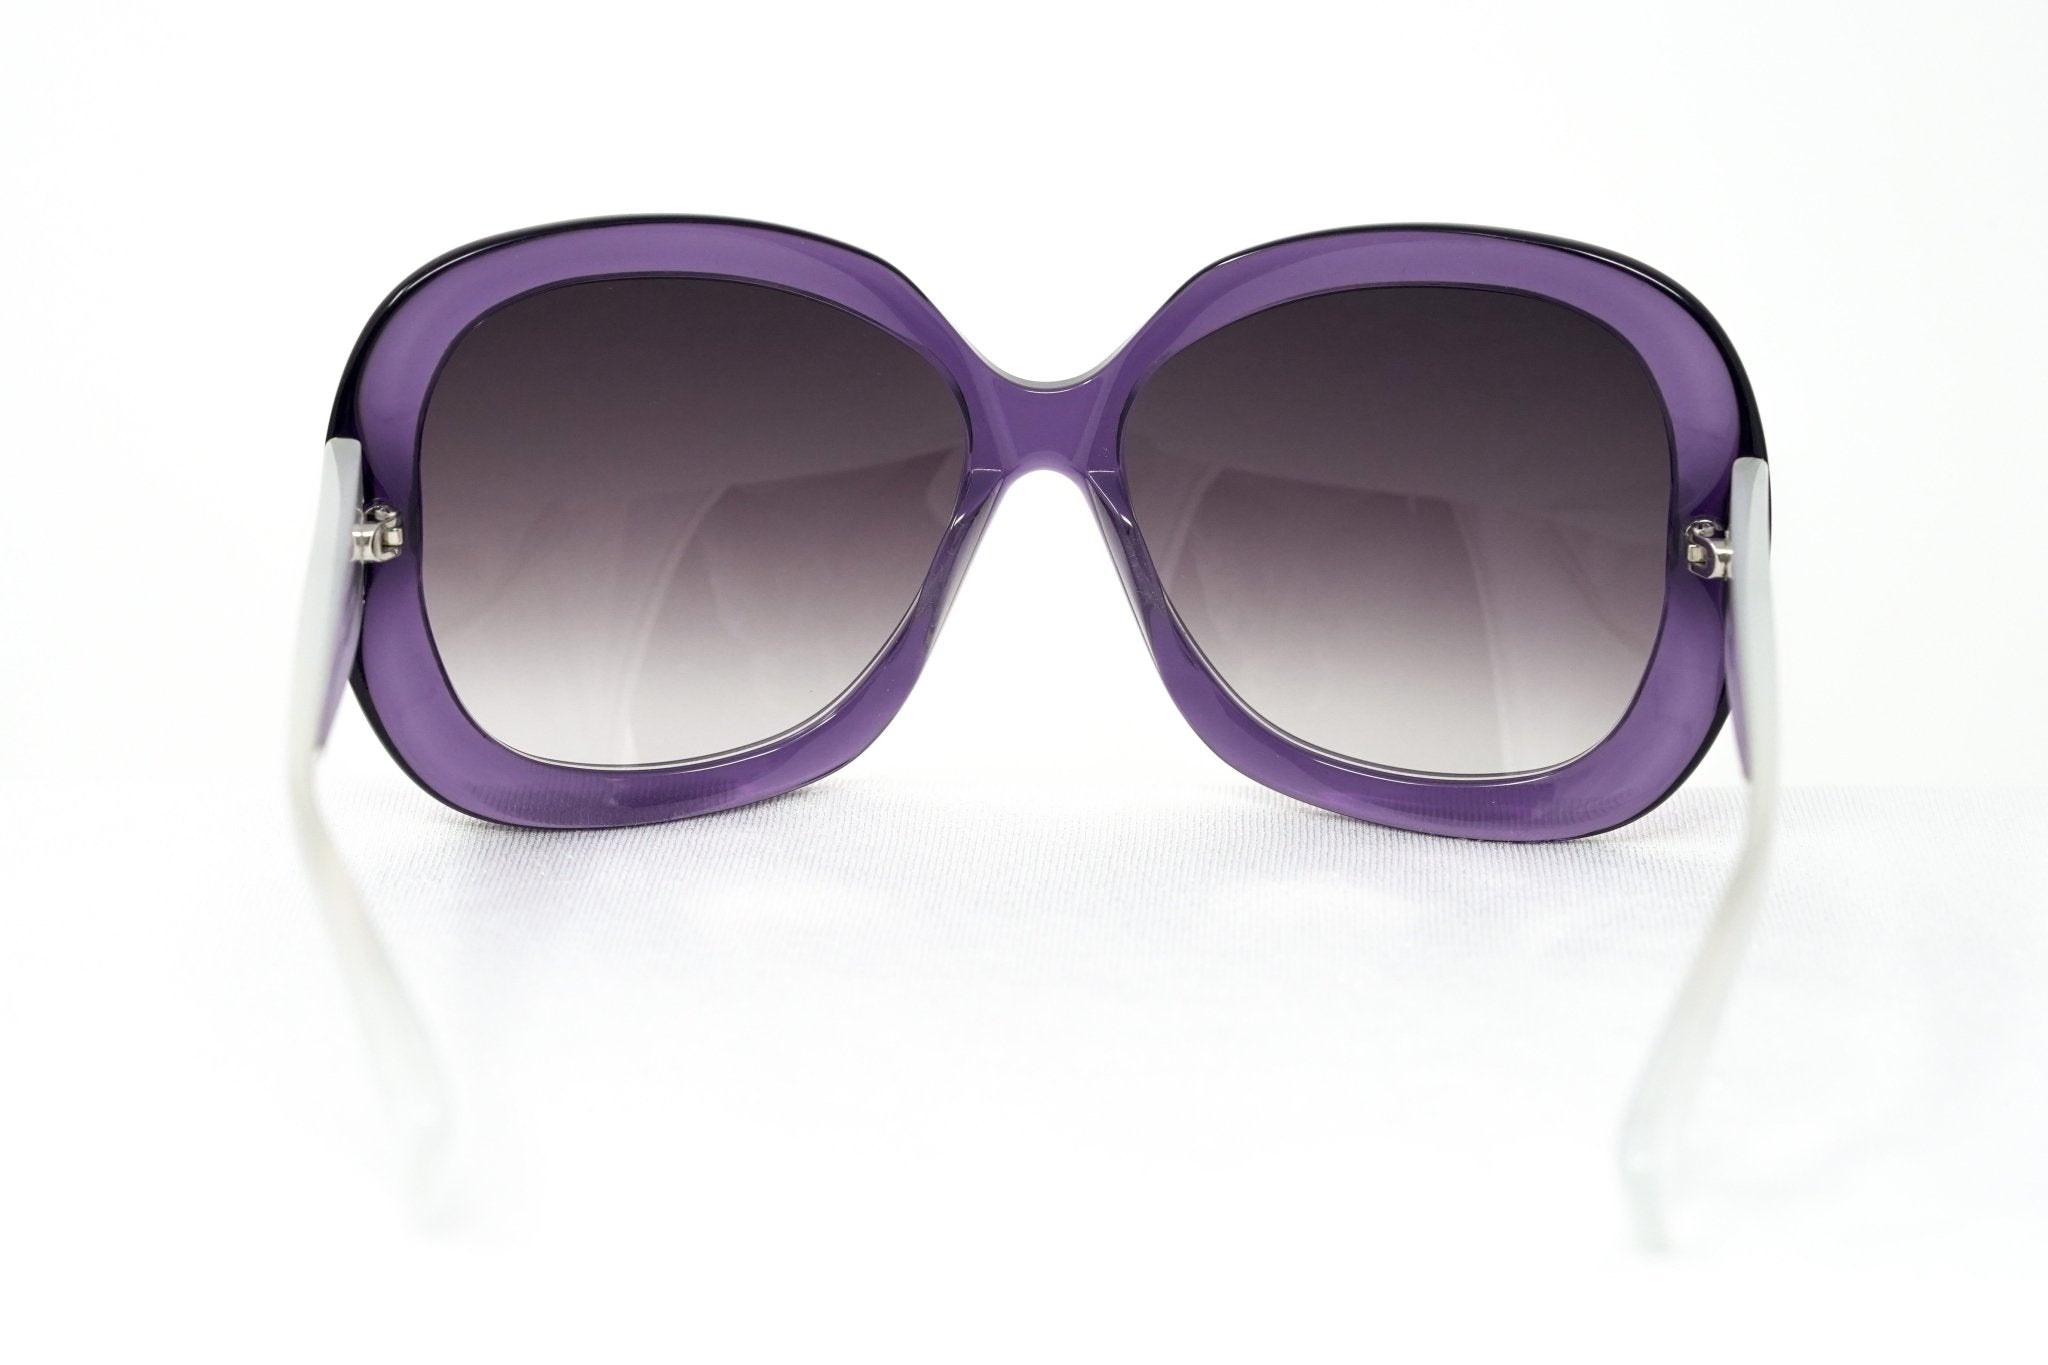 Rue De Mail Sunglasses Oversized Purple and White - Watches & Crystals